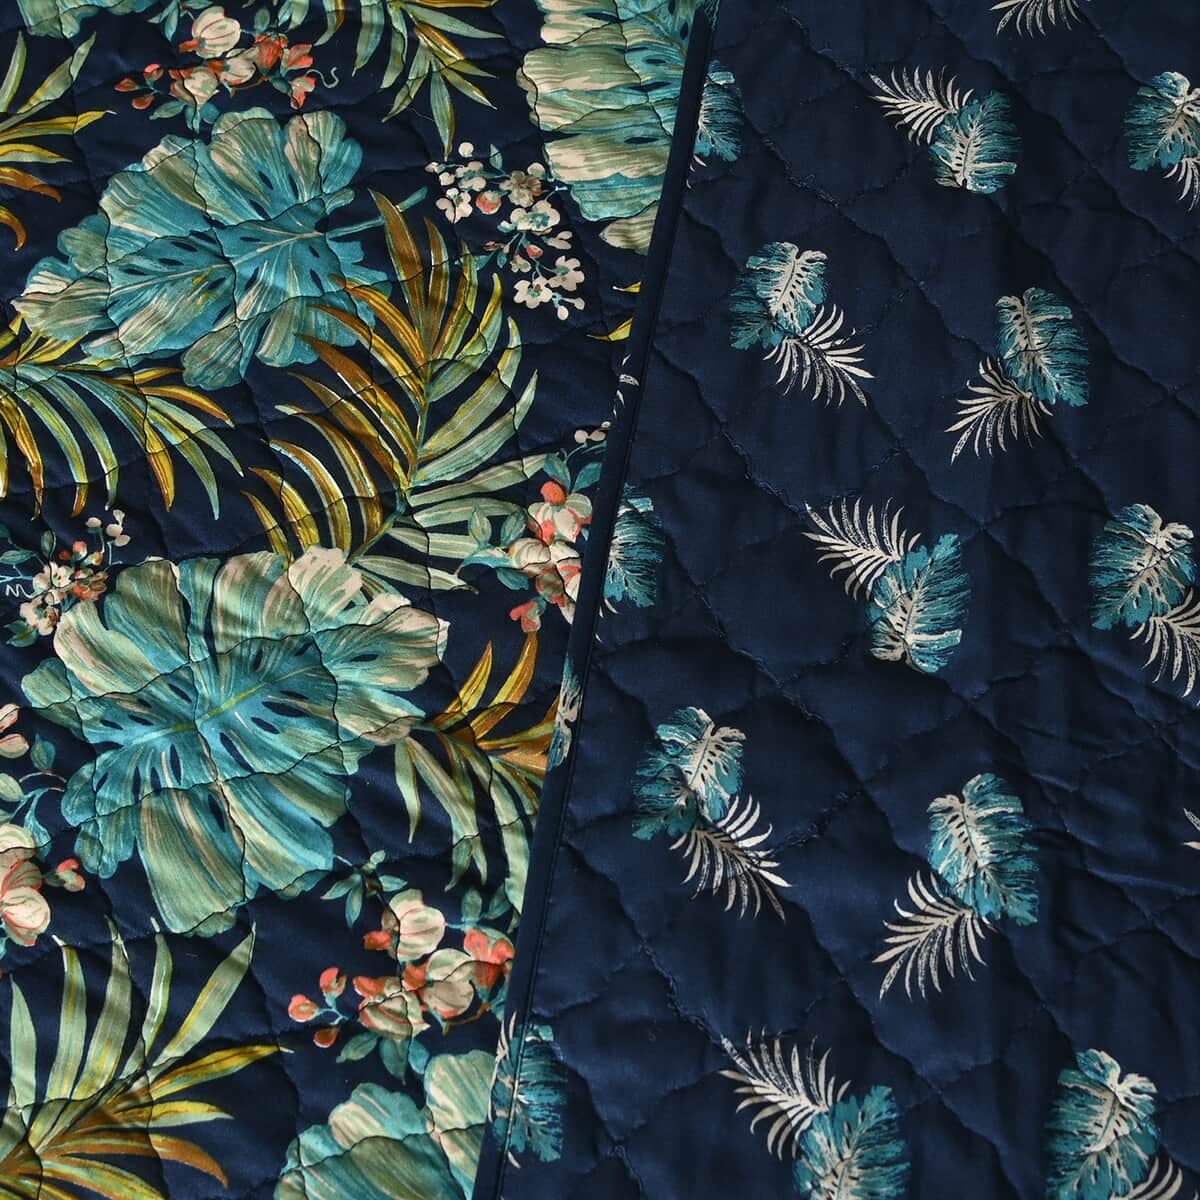 SEASIDE VILLA 3pc Navy Blue and Green Leaf Disperse Print Quilt Set - Blue (Queen) image number 2